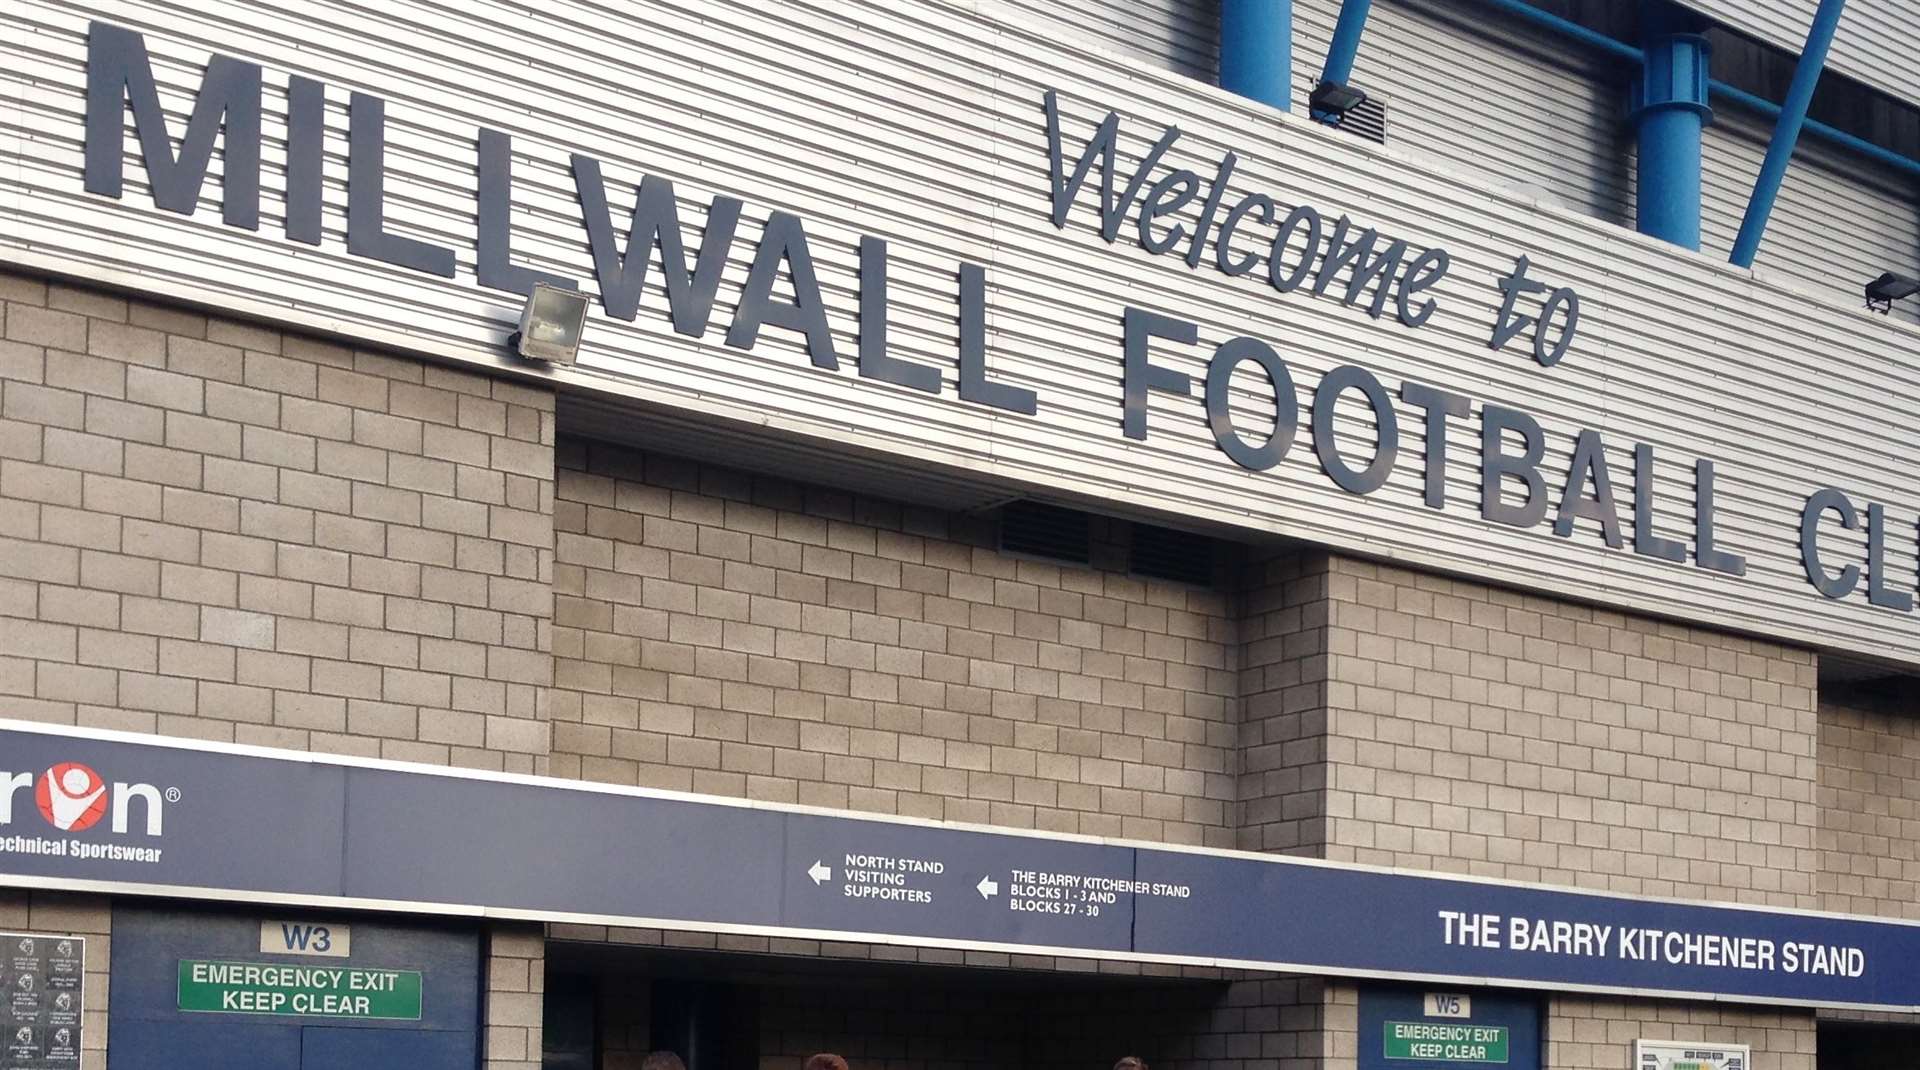 Plans for new Millwall FC training ground approved on green belt in West  Kingsdown, near Brands Hatch